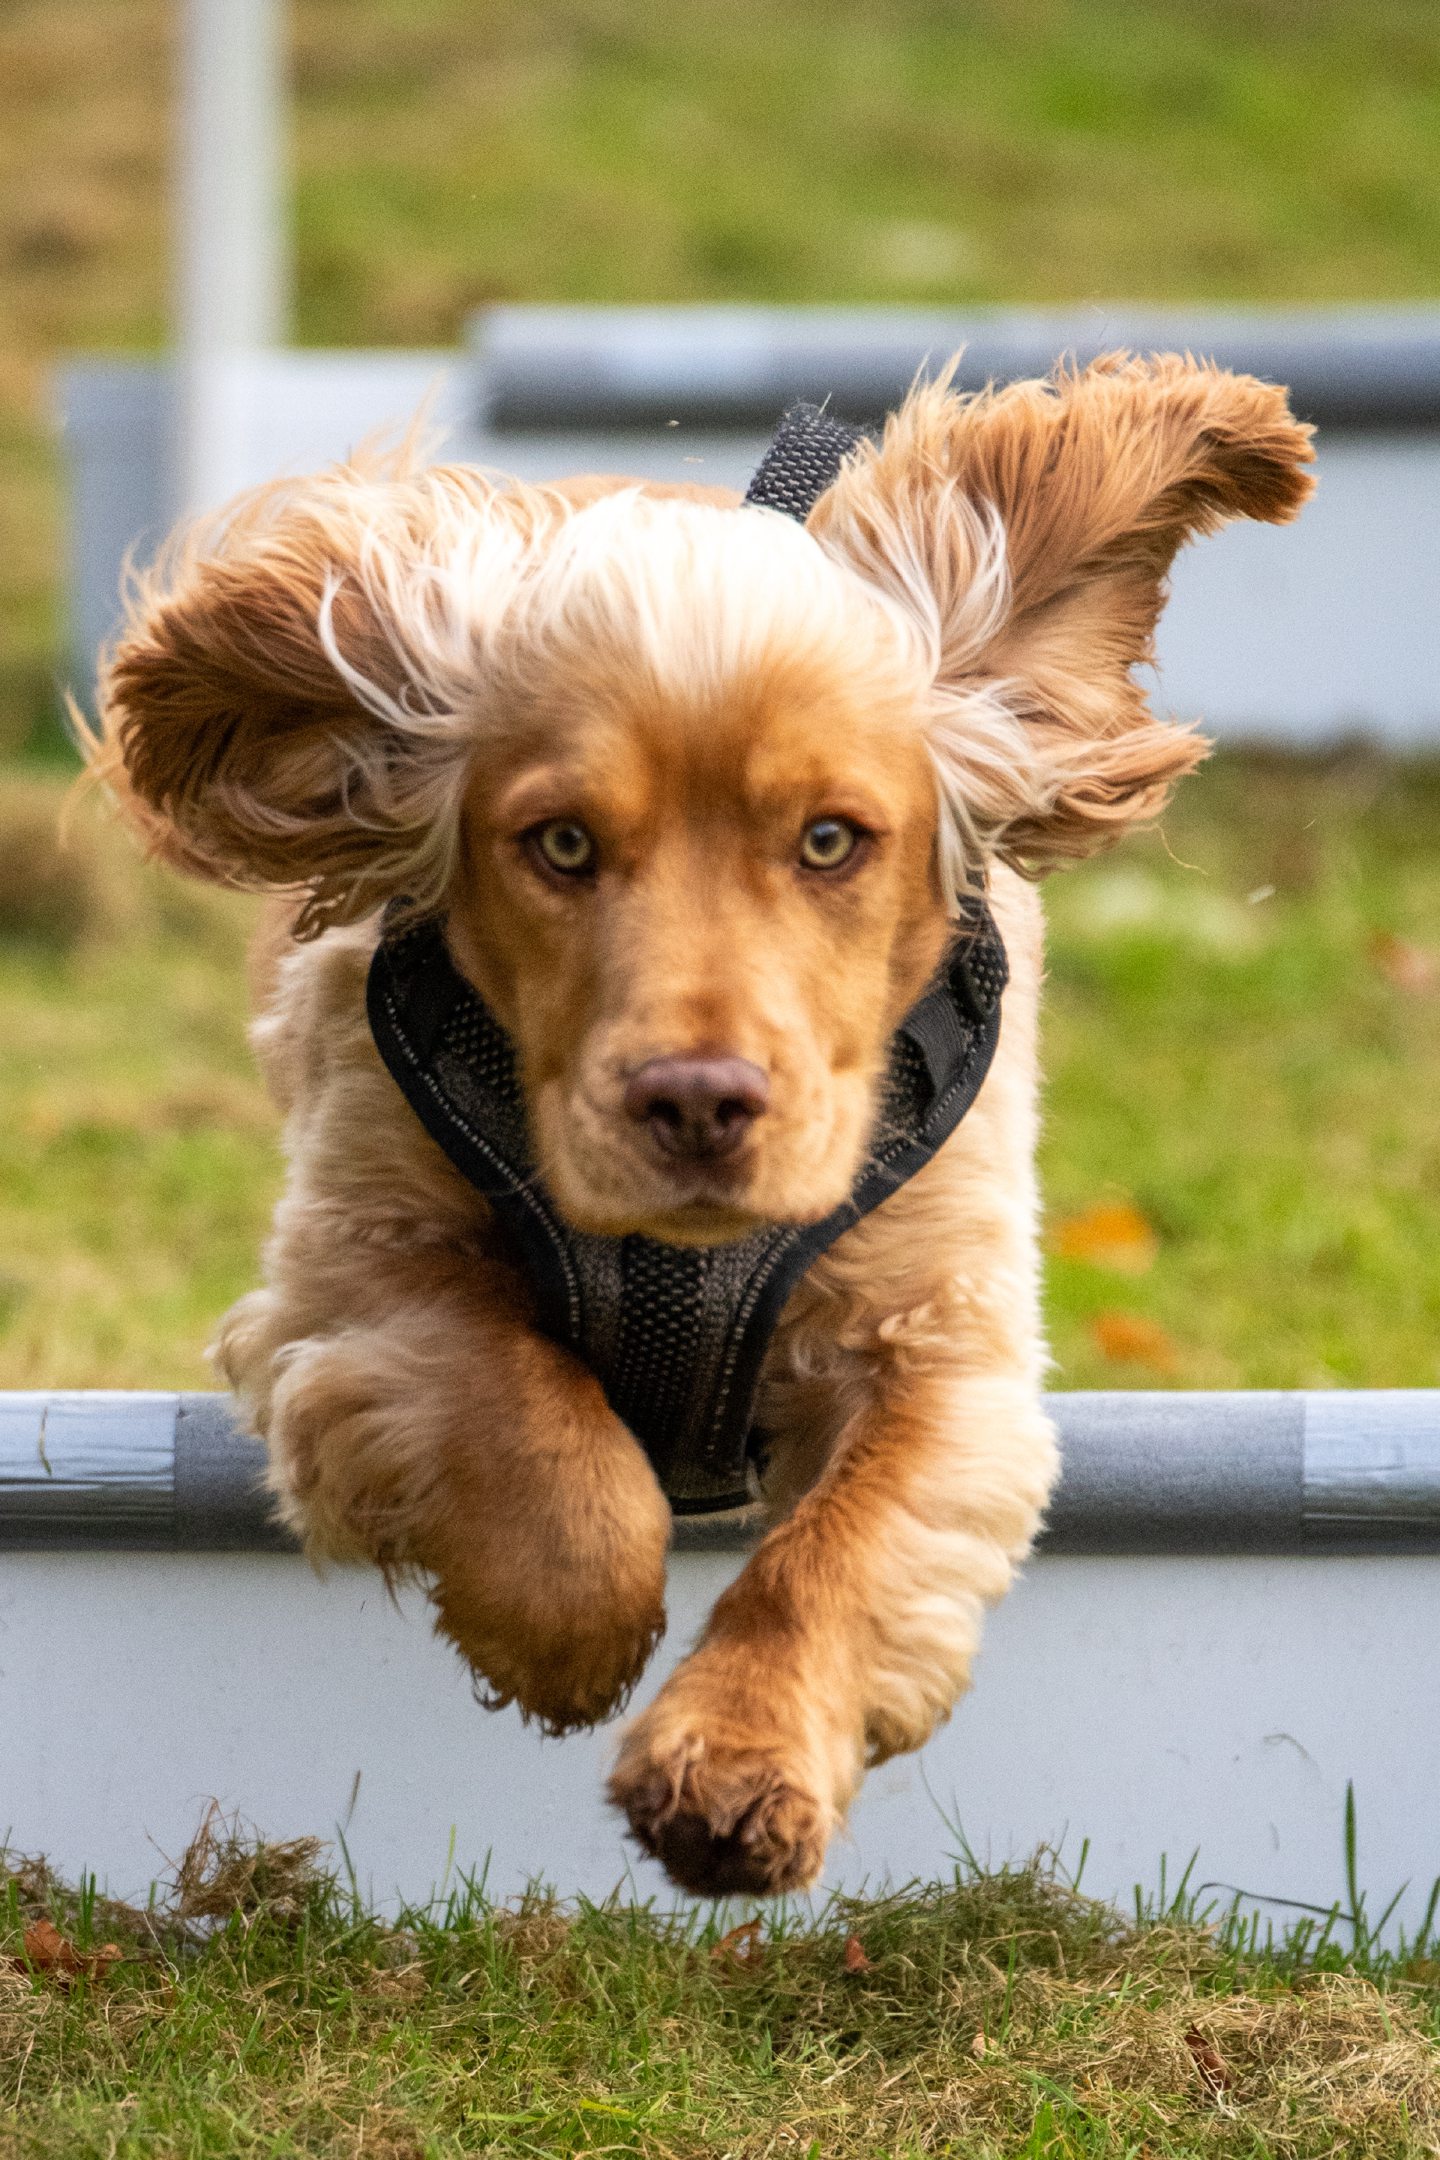 One of the dogs with long ears jumping over the hurdles.